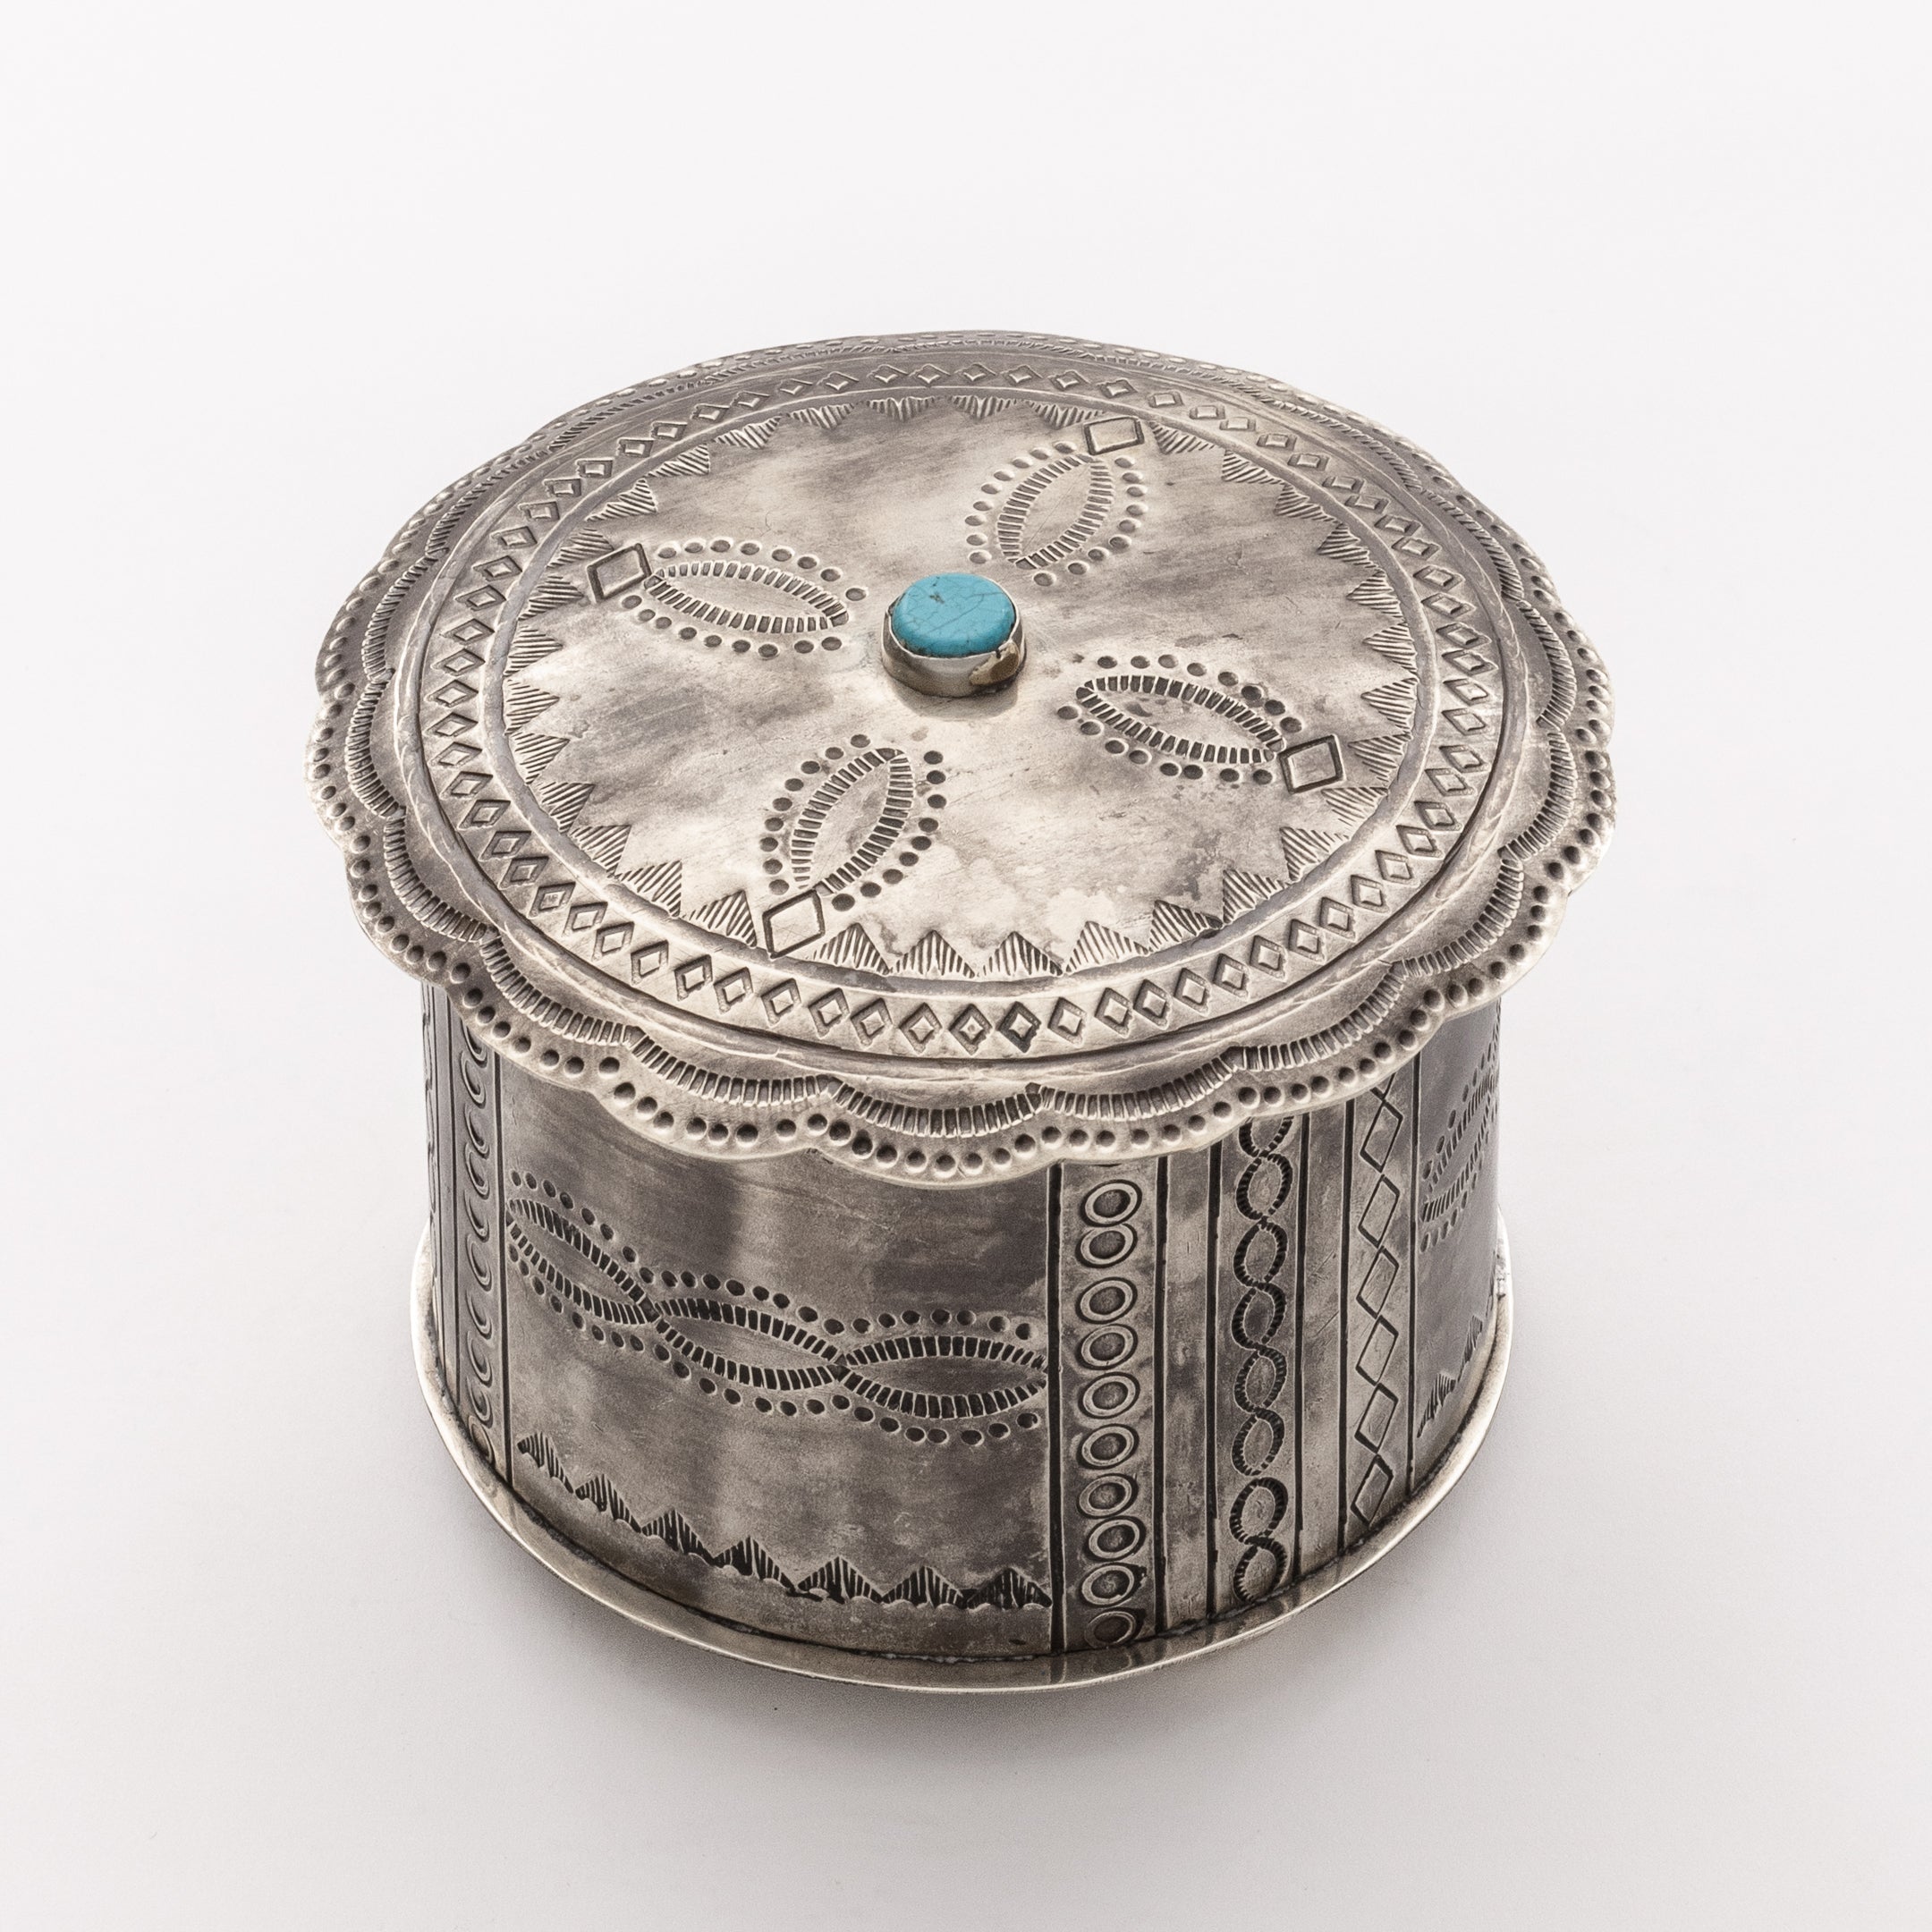 WJA-093-T STAMPED ROUND BOX WITH TURQUOISE AND LID